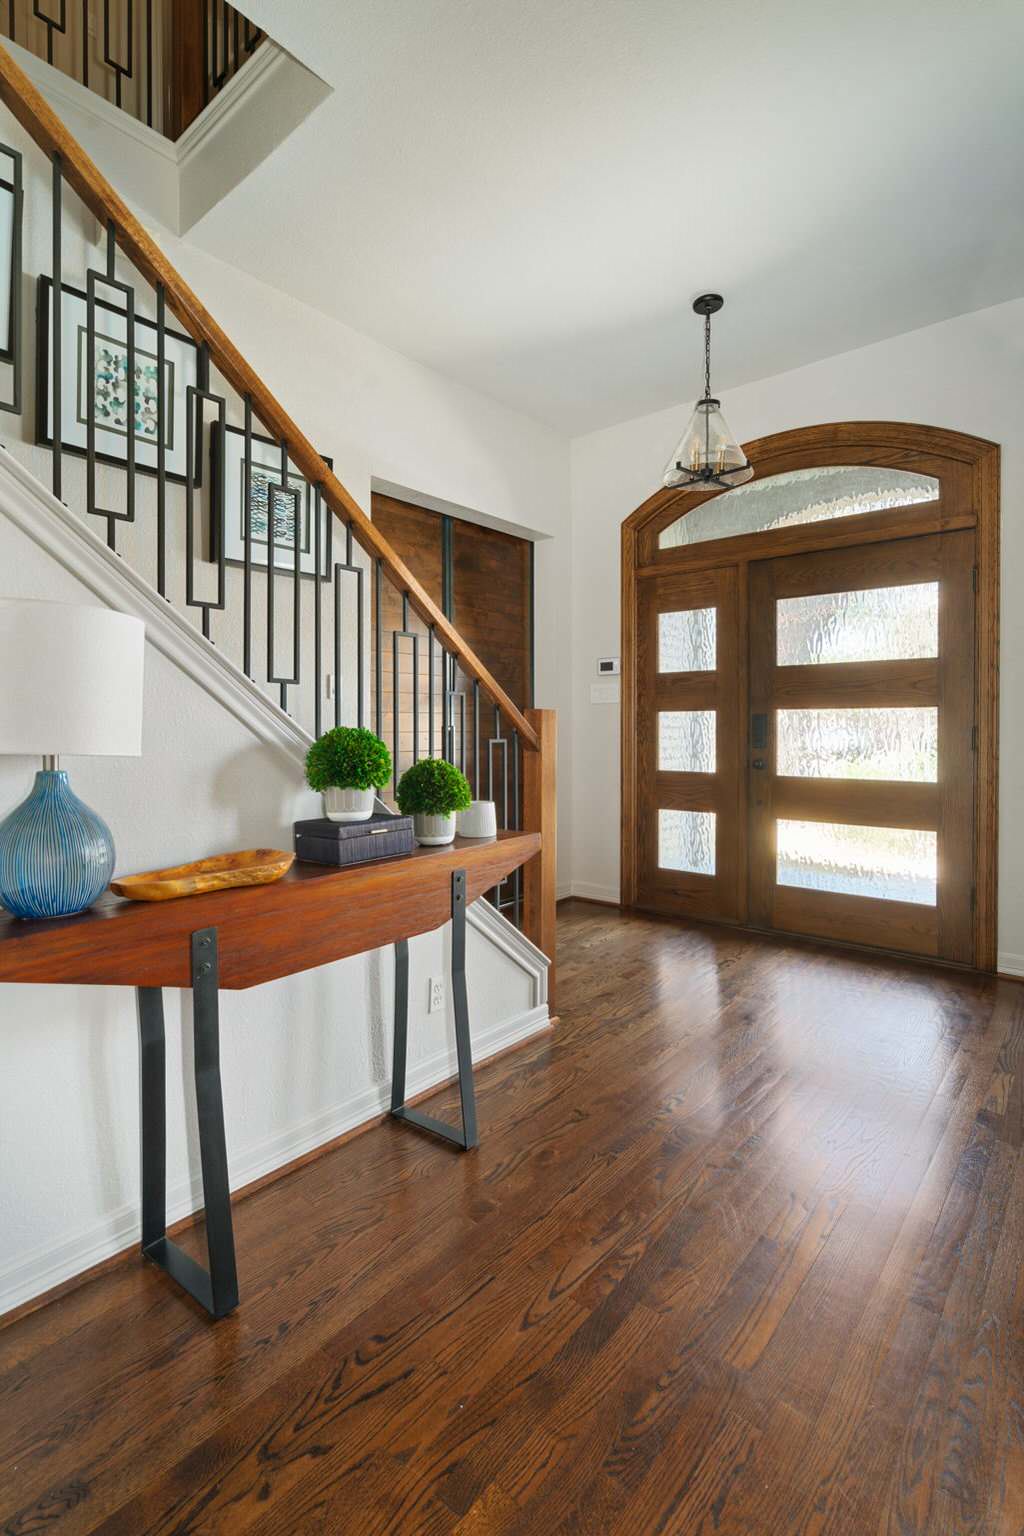 Inspiration for an entryway remodel in Dallas